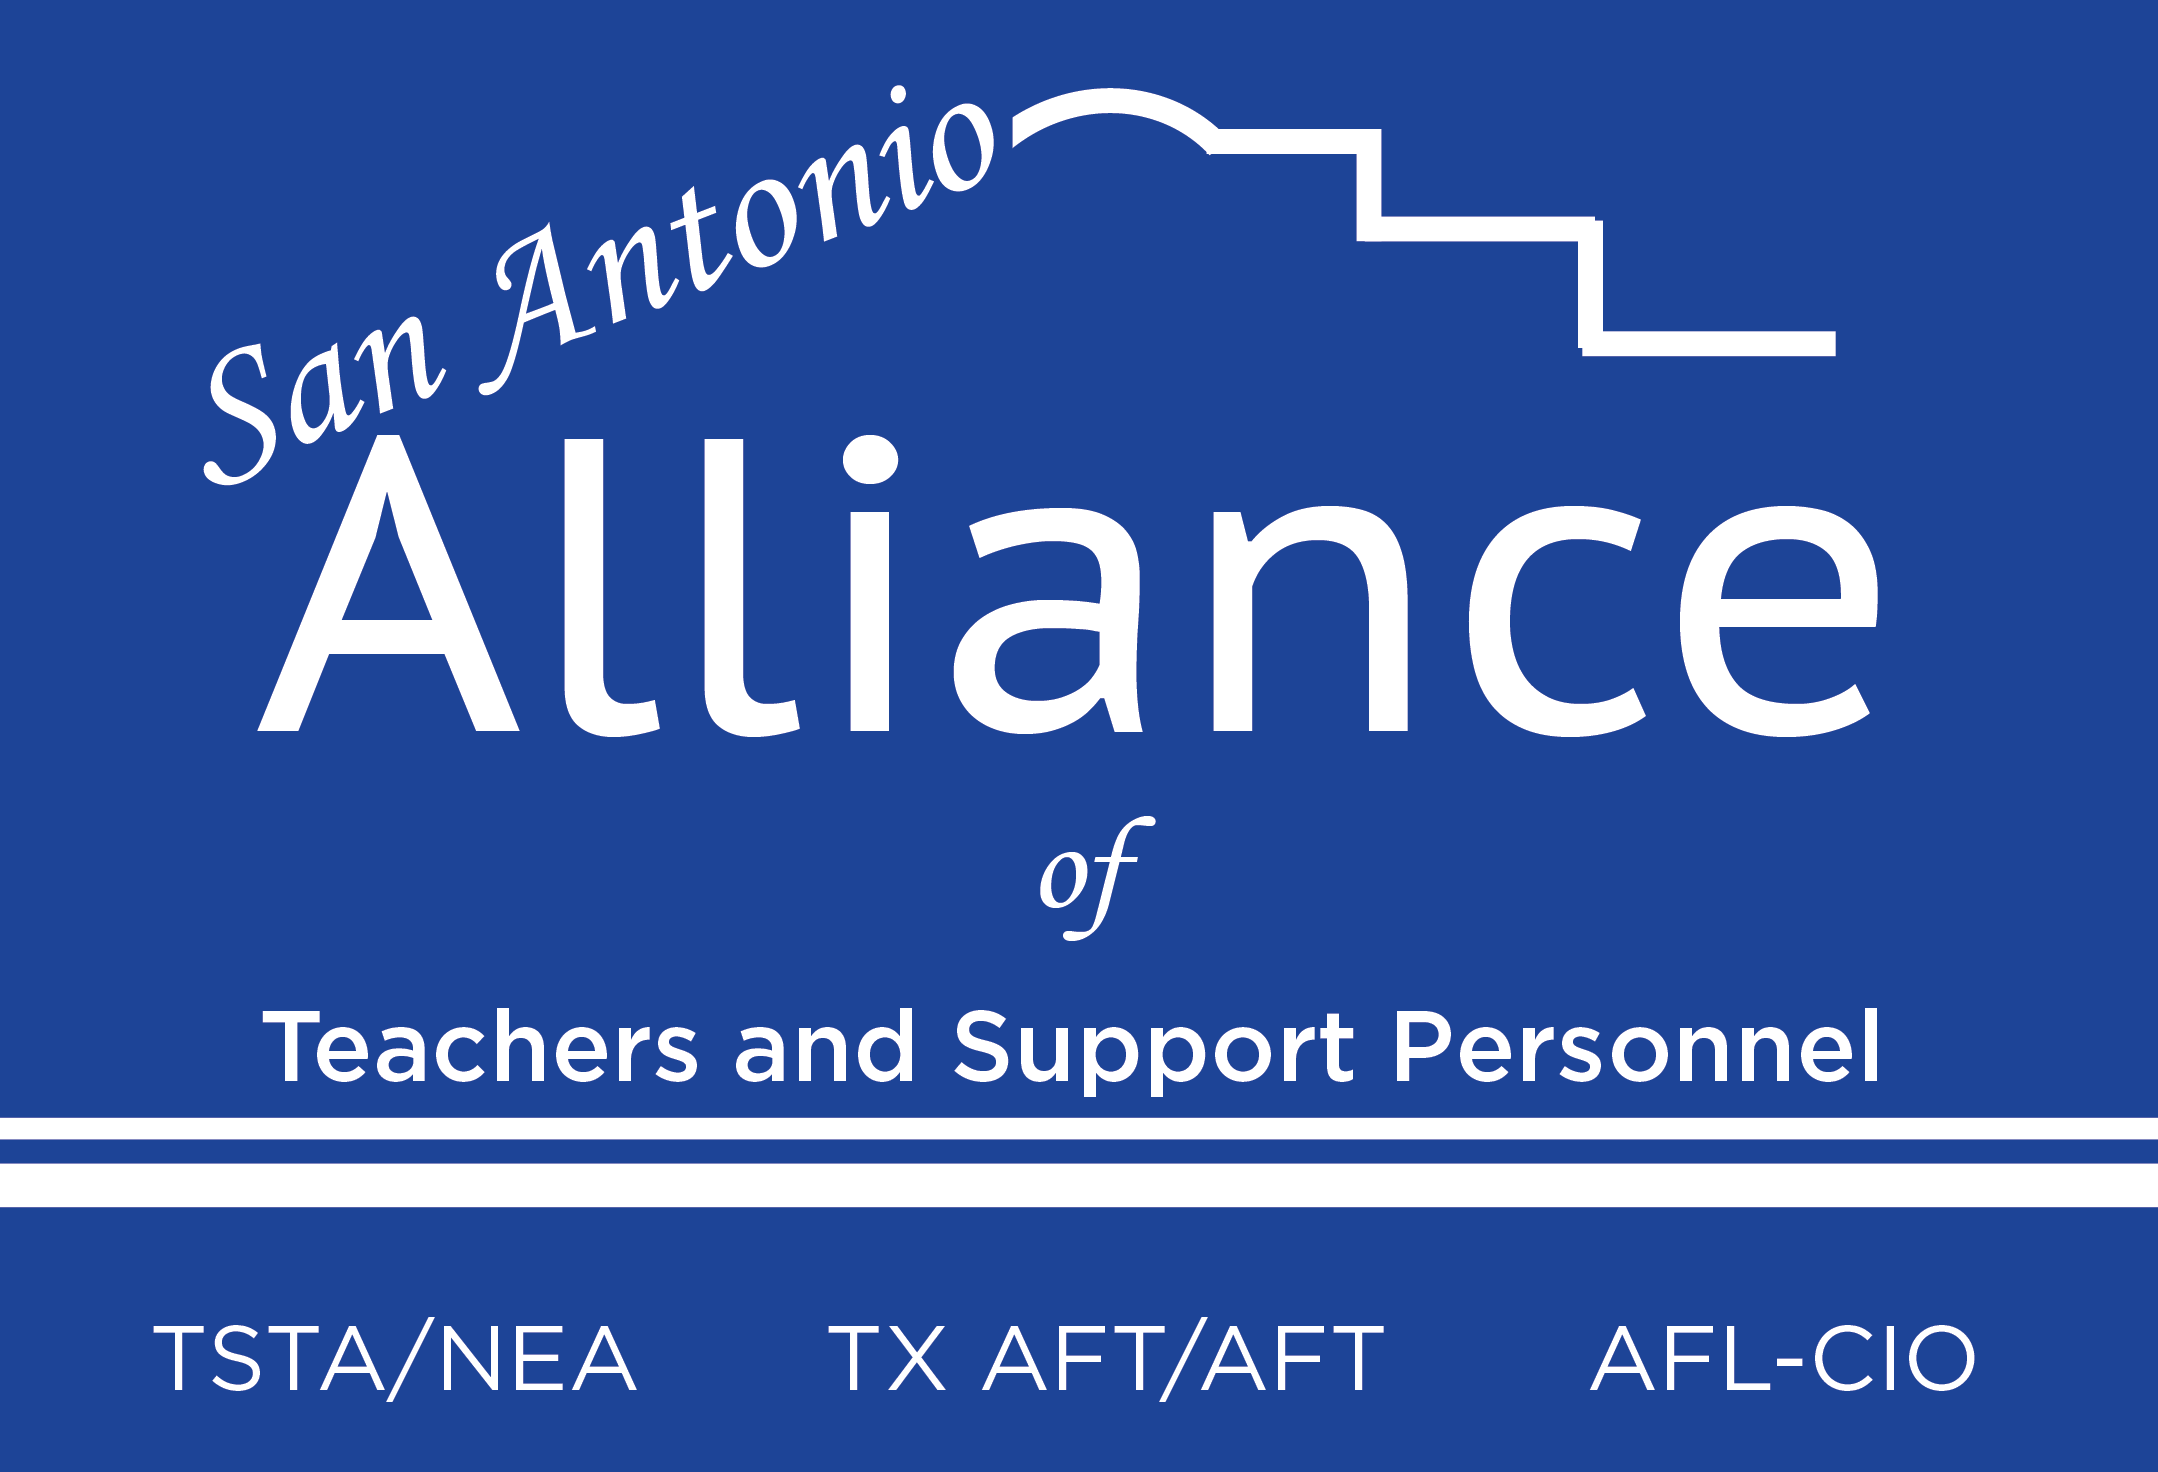 San Antonio Alliance of Teachers and Support Personnel